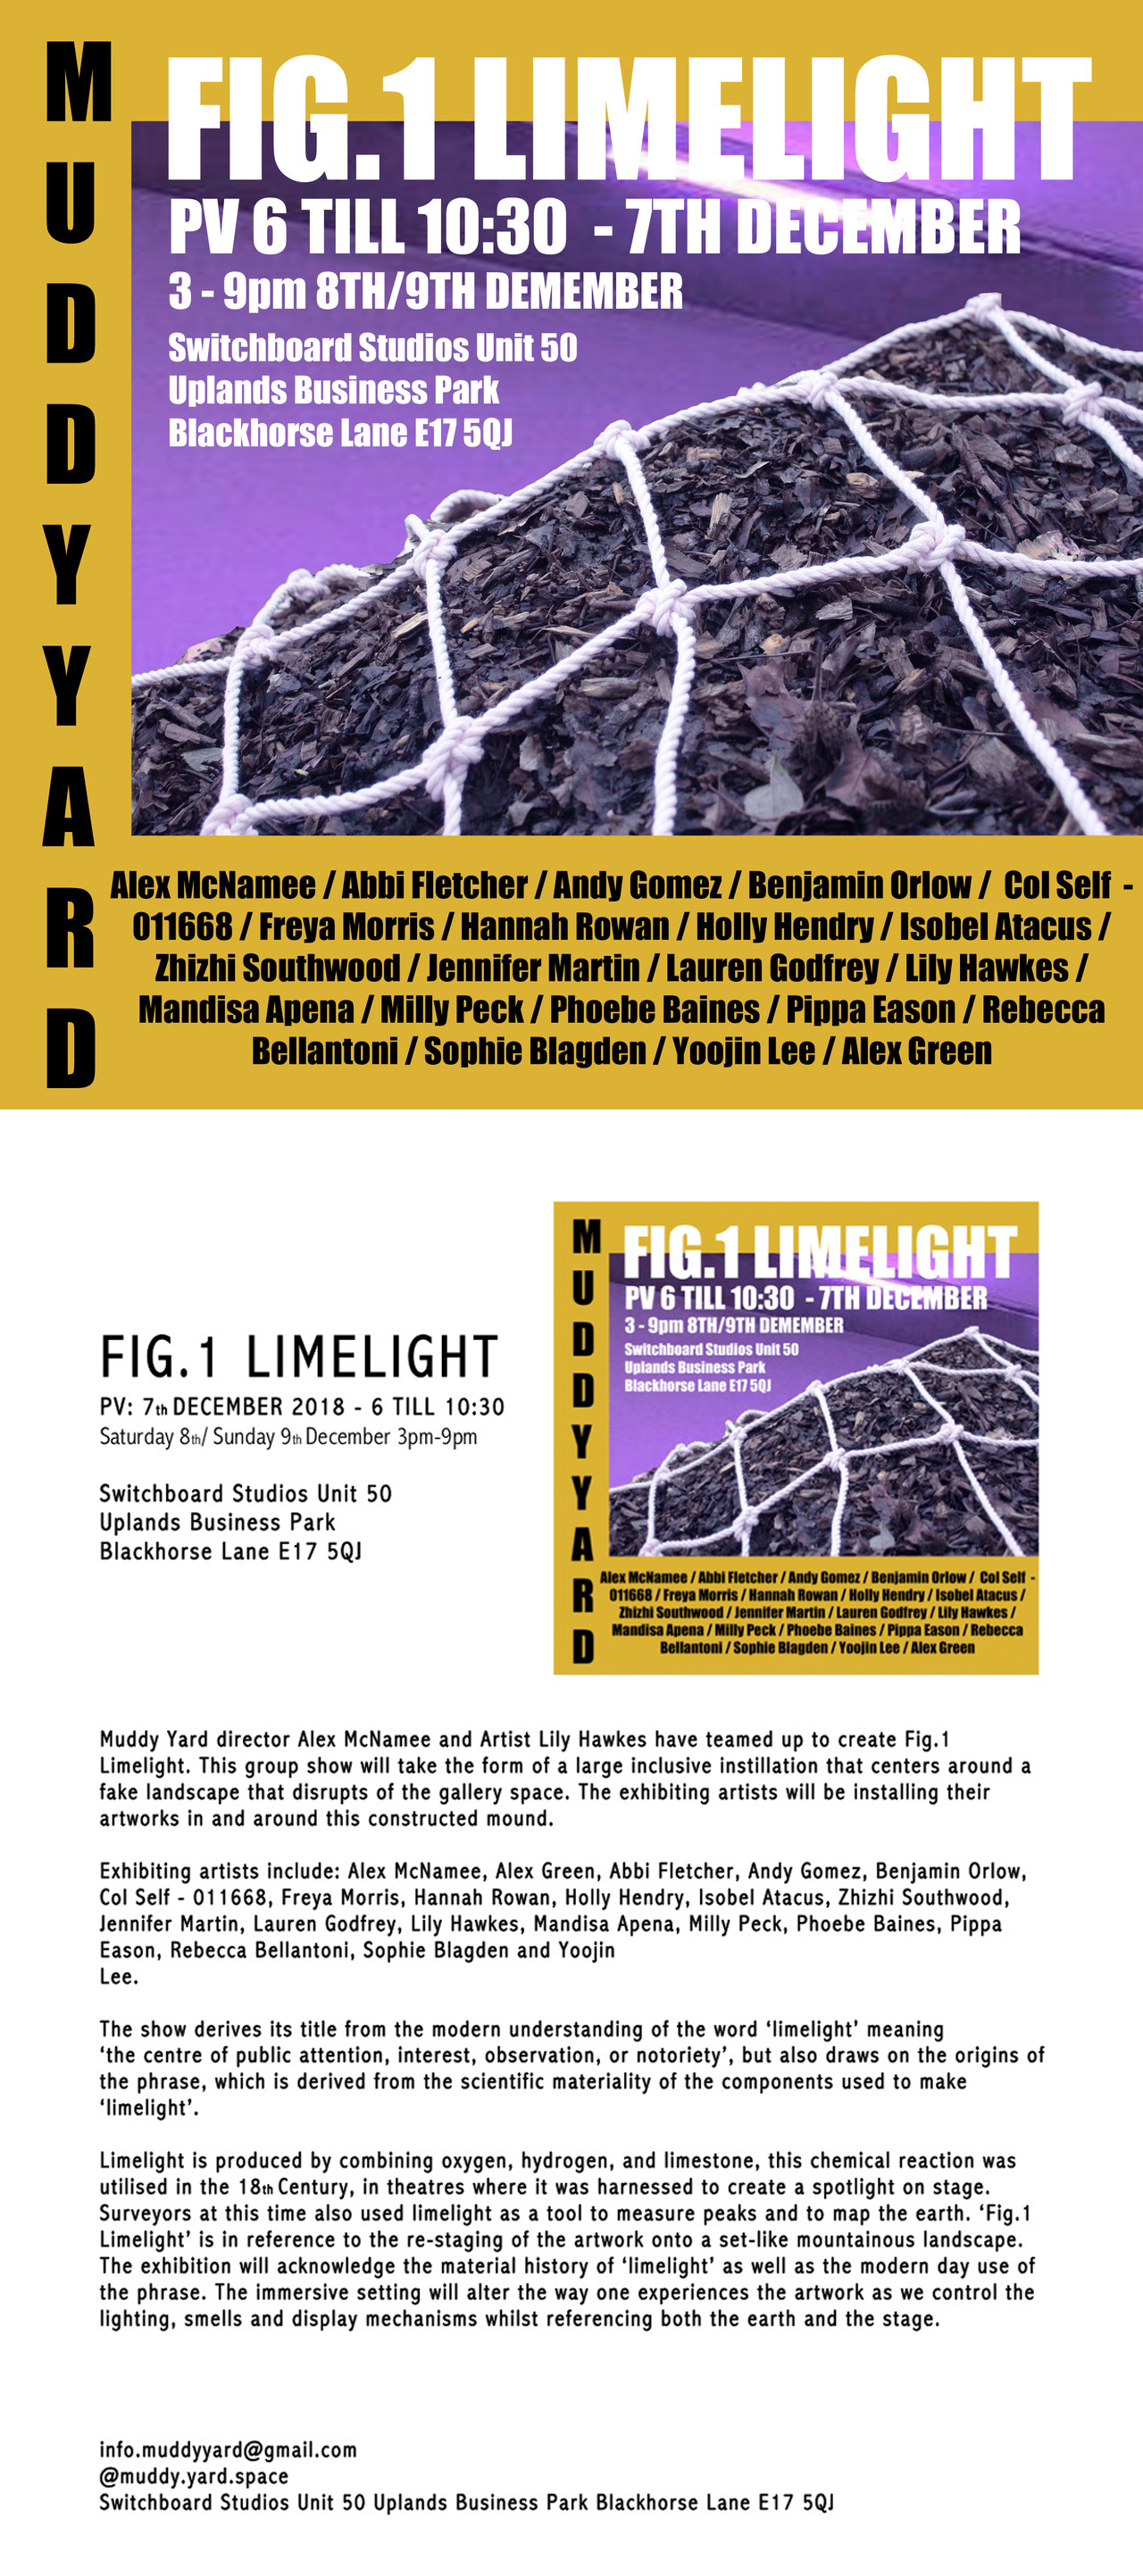 <hr /> <b>◎  [08.11.17]</b> 

I am showing some work in this! FIG 1 LIMELIGHT opens Dec 7th, PV 6-10:30.
<br /> <br /> “This group show will take the form of a large inclusive installation that centres around a fake landscape that disrupts of the gallery space. The exhibiting artists will be installing their artworks in and around this constructed mound.”